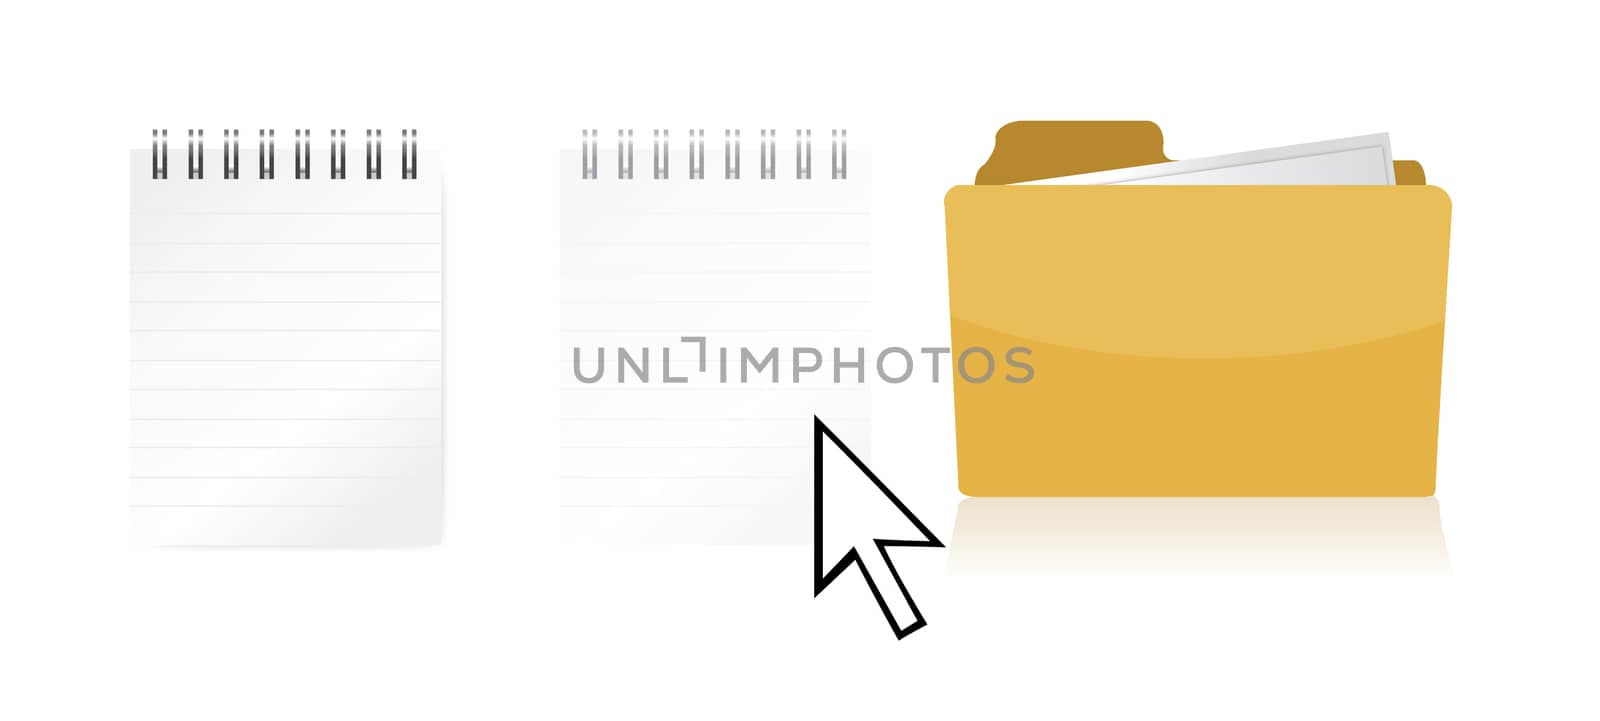 transferring files illustration design isolated over a white background